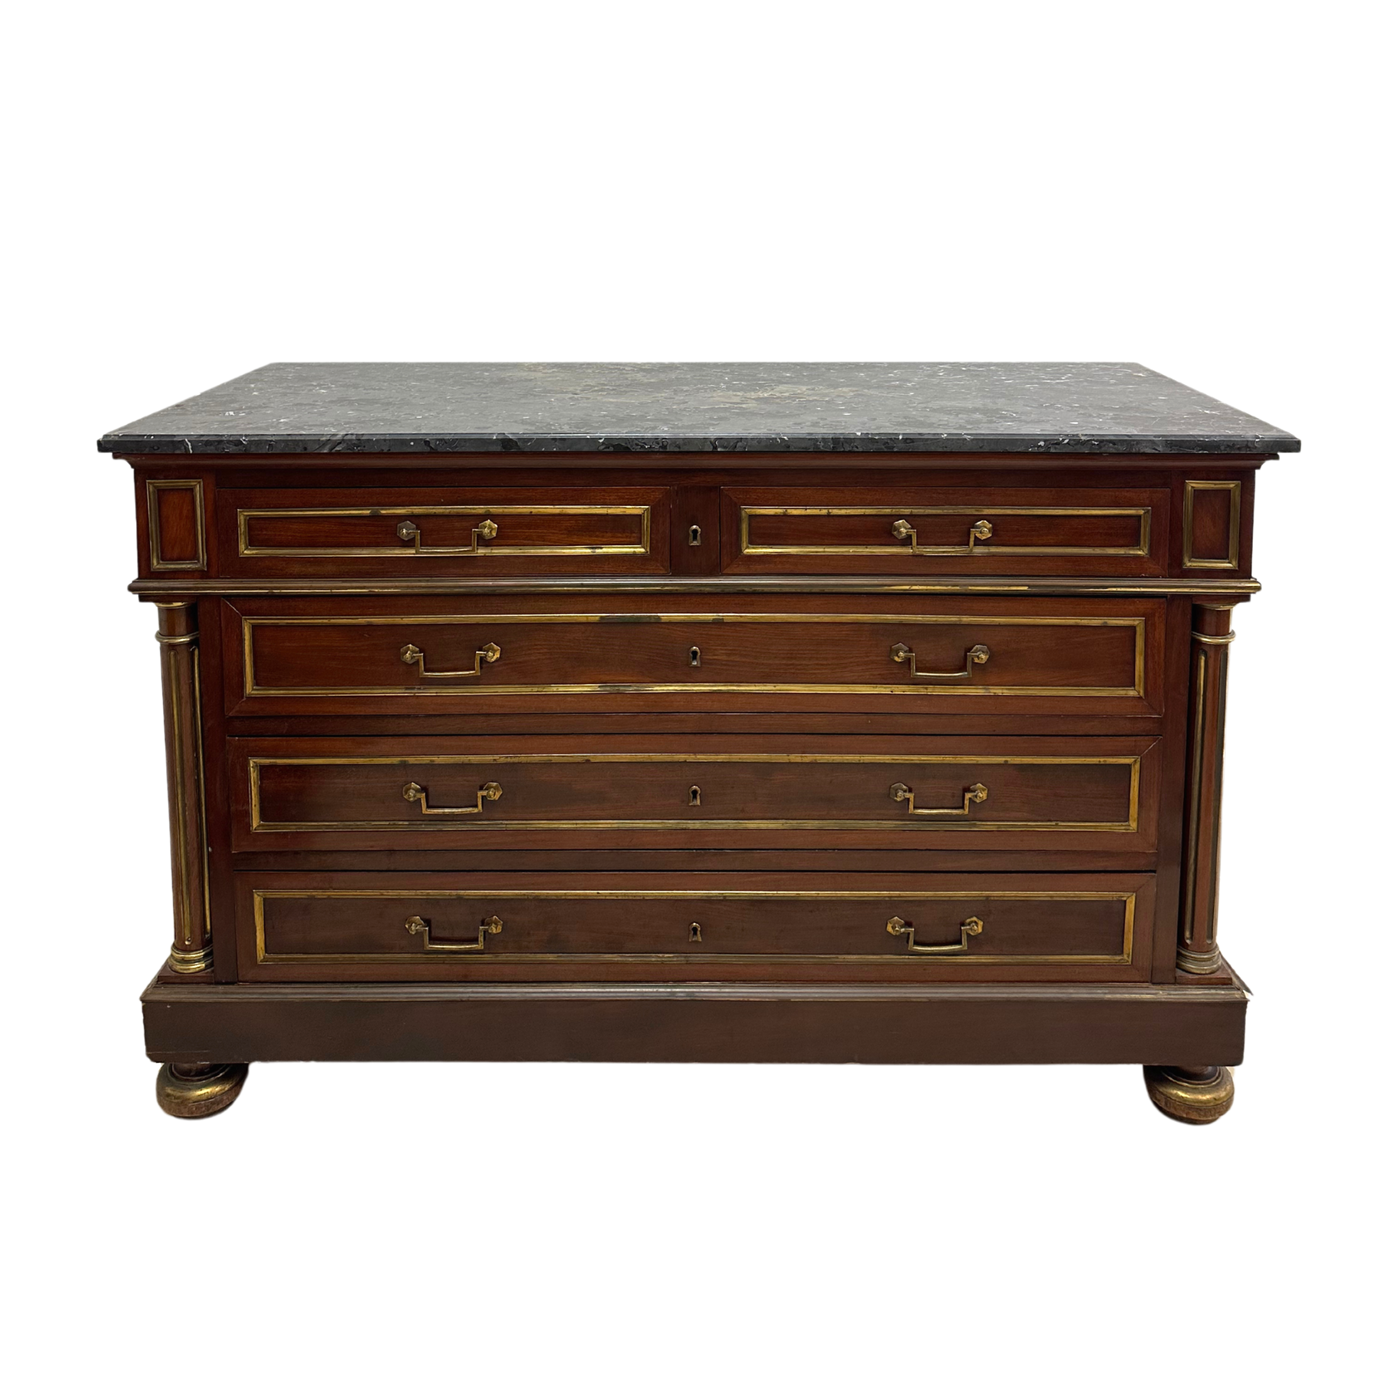 19th c. Louis XVI Style Marble Top Commode